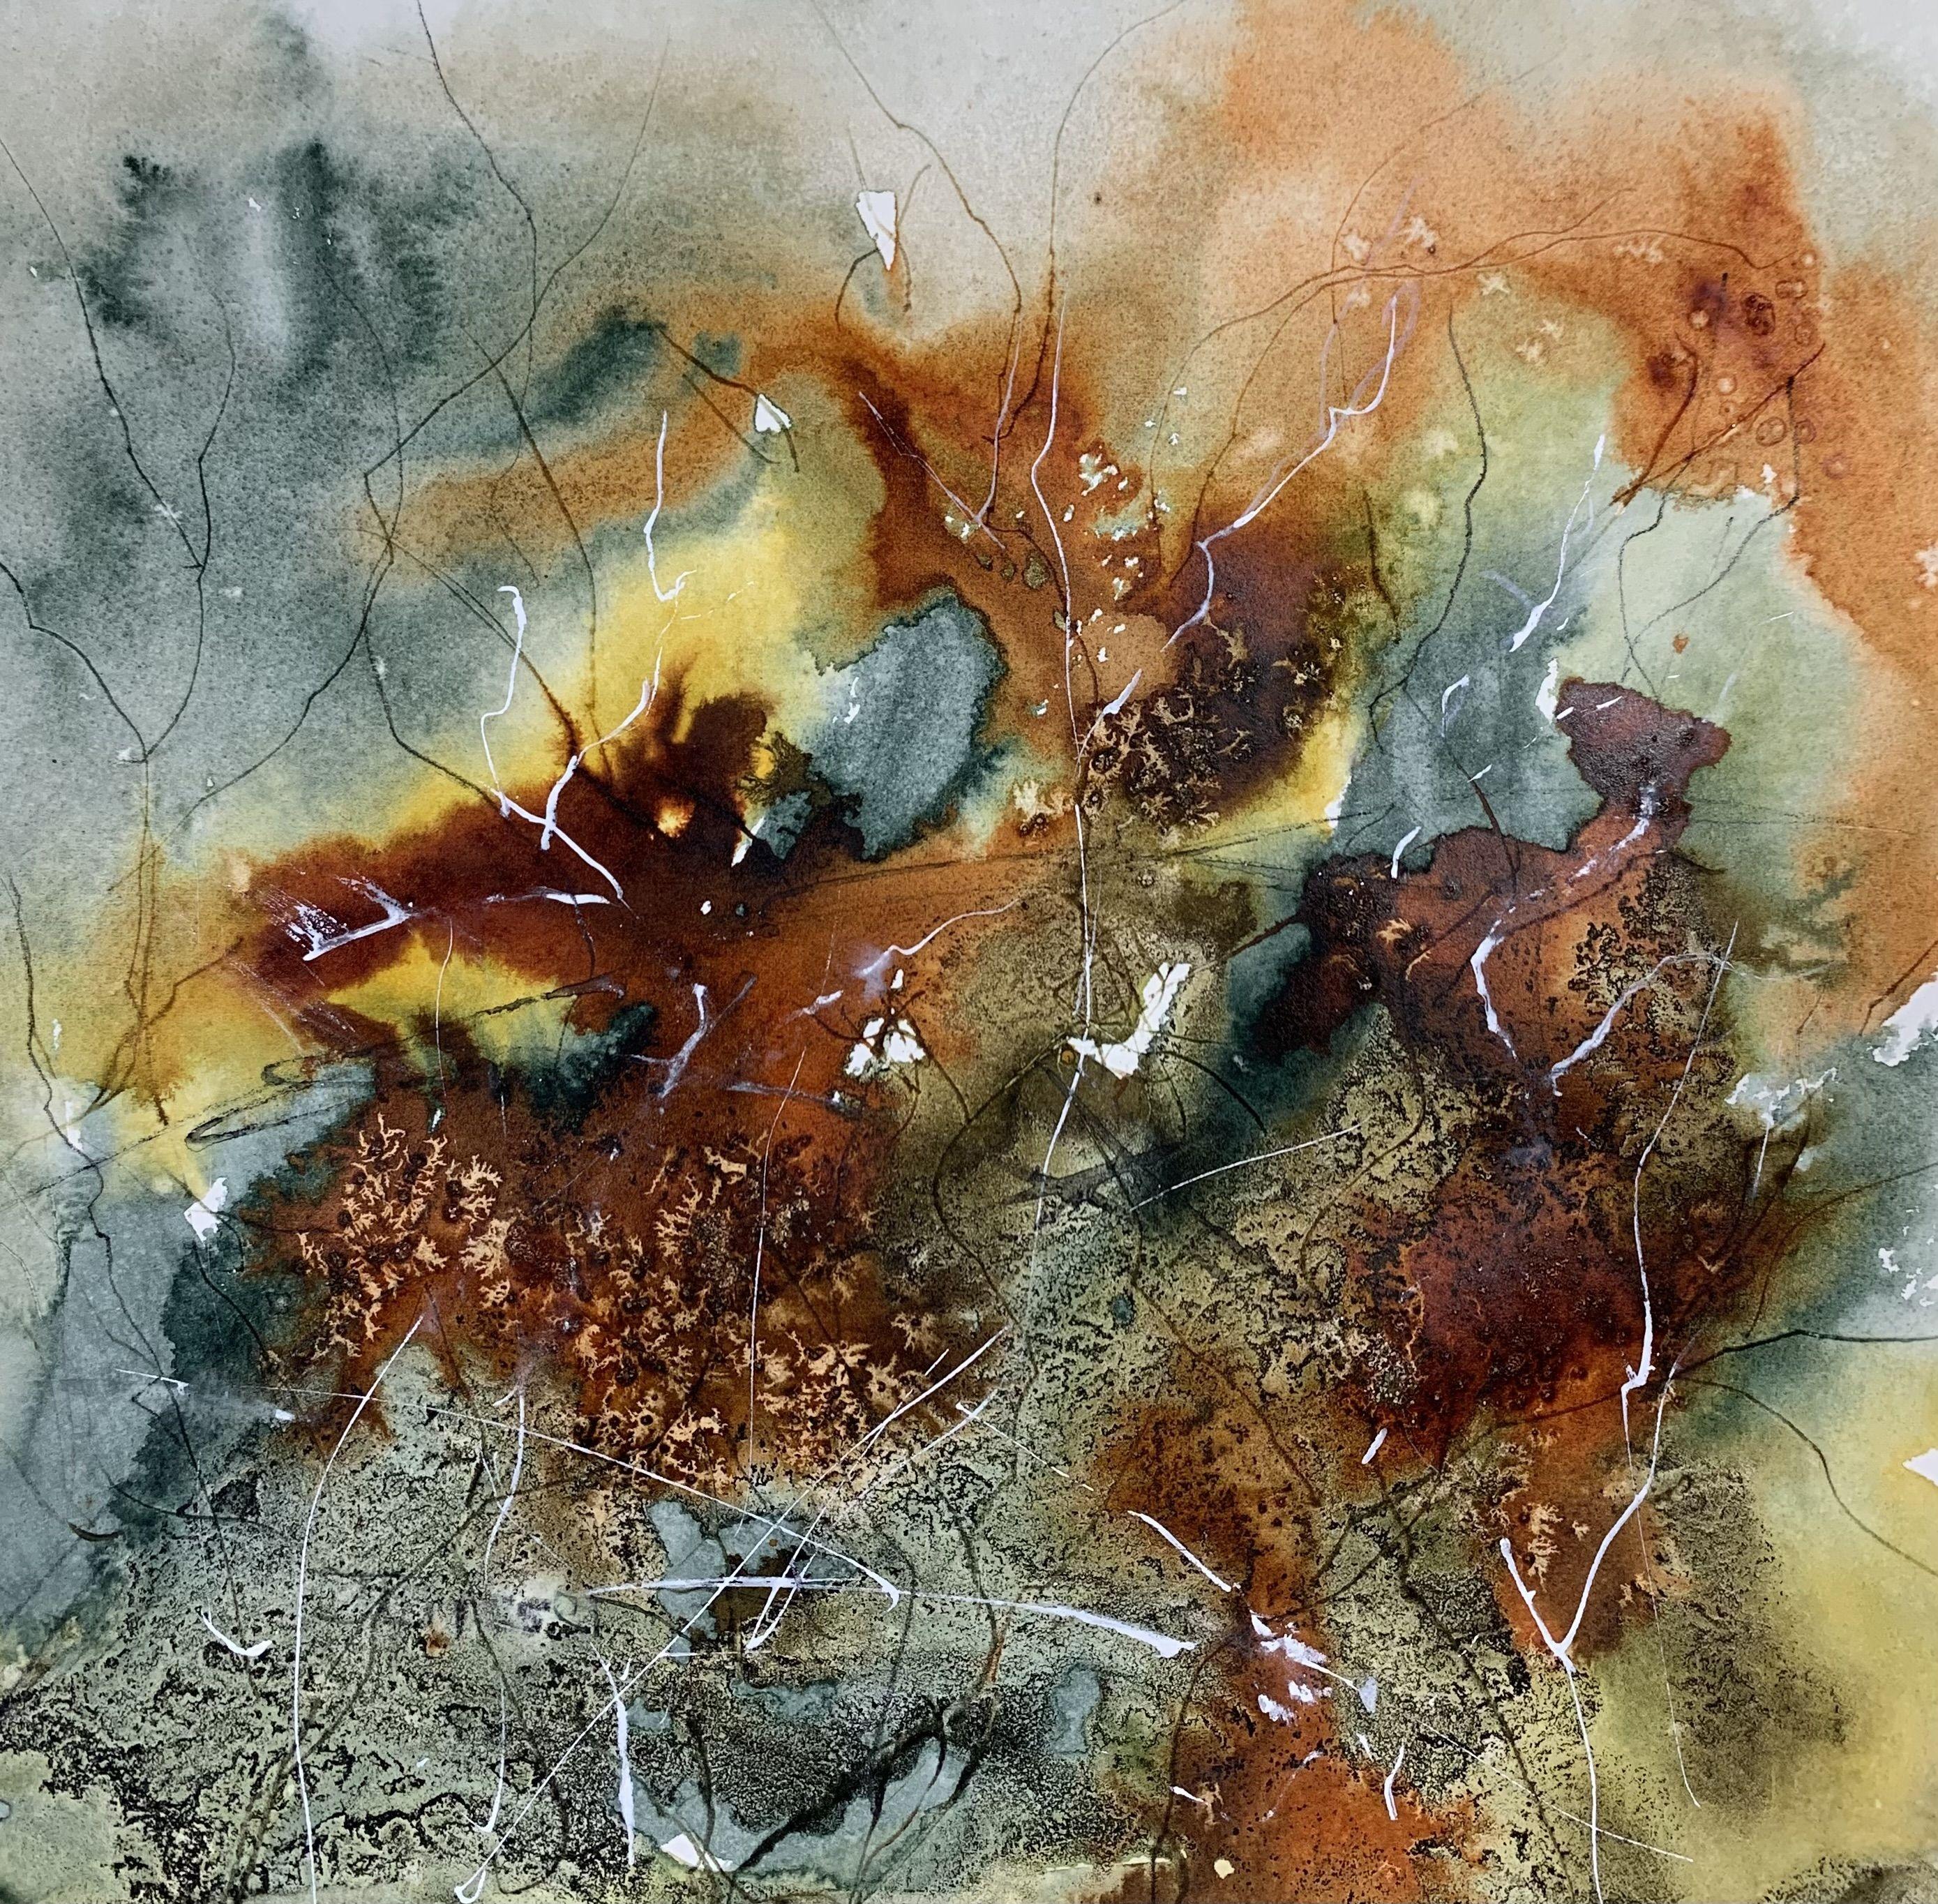 Abstract Shapes, Mixed Media on Watercolor Paper - Mixed Media Art by Jean Lurssen